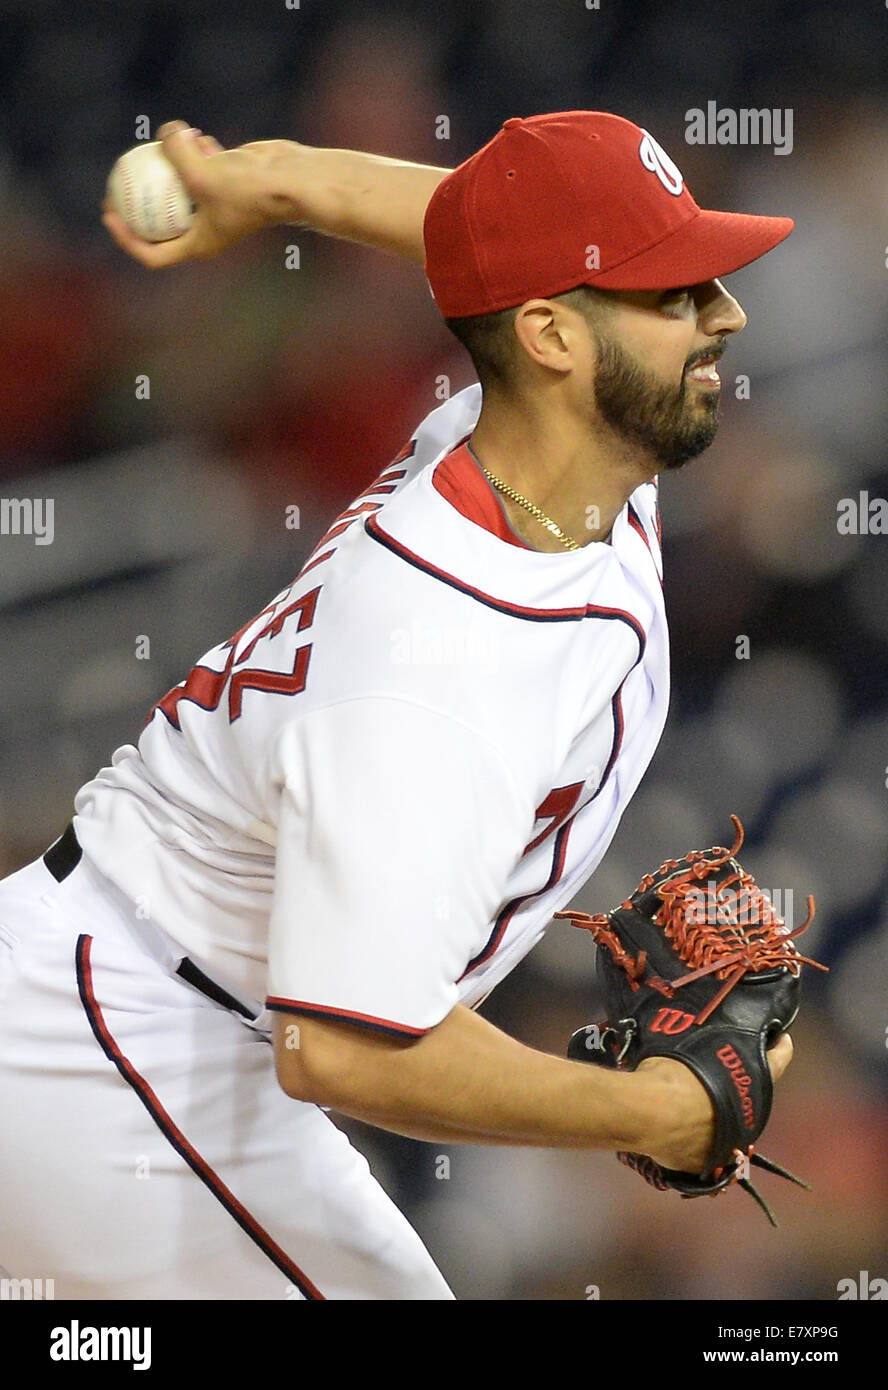 Washington, DC, USA. 25th Sep, 2014.  Washington Nationals starting pitcher Gio Gonzalez (47) delivers against the New York Mets in the first inning of the second game of a doubleheader at Nationals Park in Washington. The Nationals beat the Mets, 3-0. Credit:  ZUMA Press, Inc./Alamy Live News Stock Photo